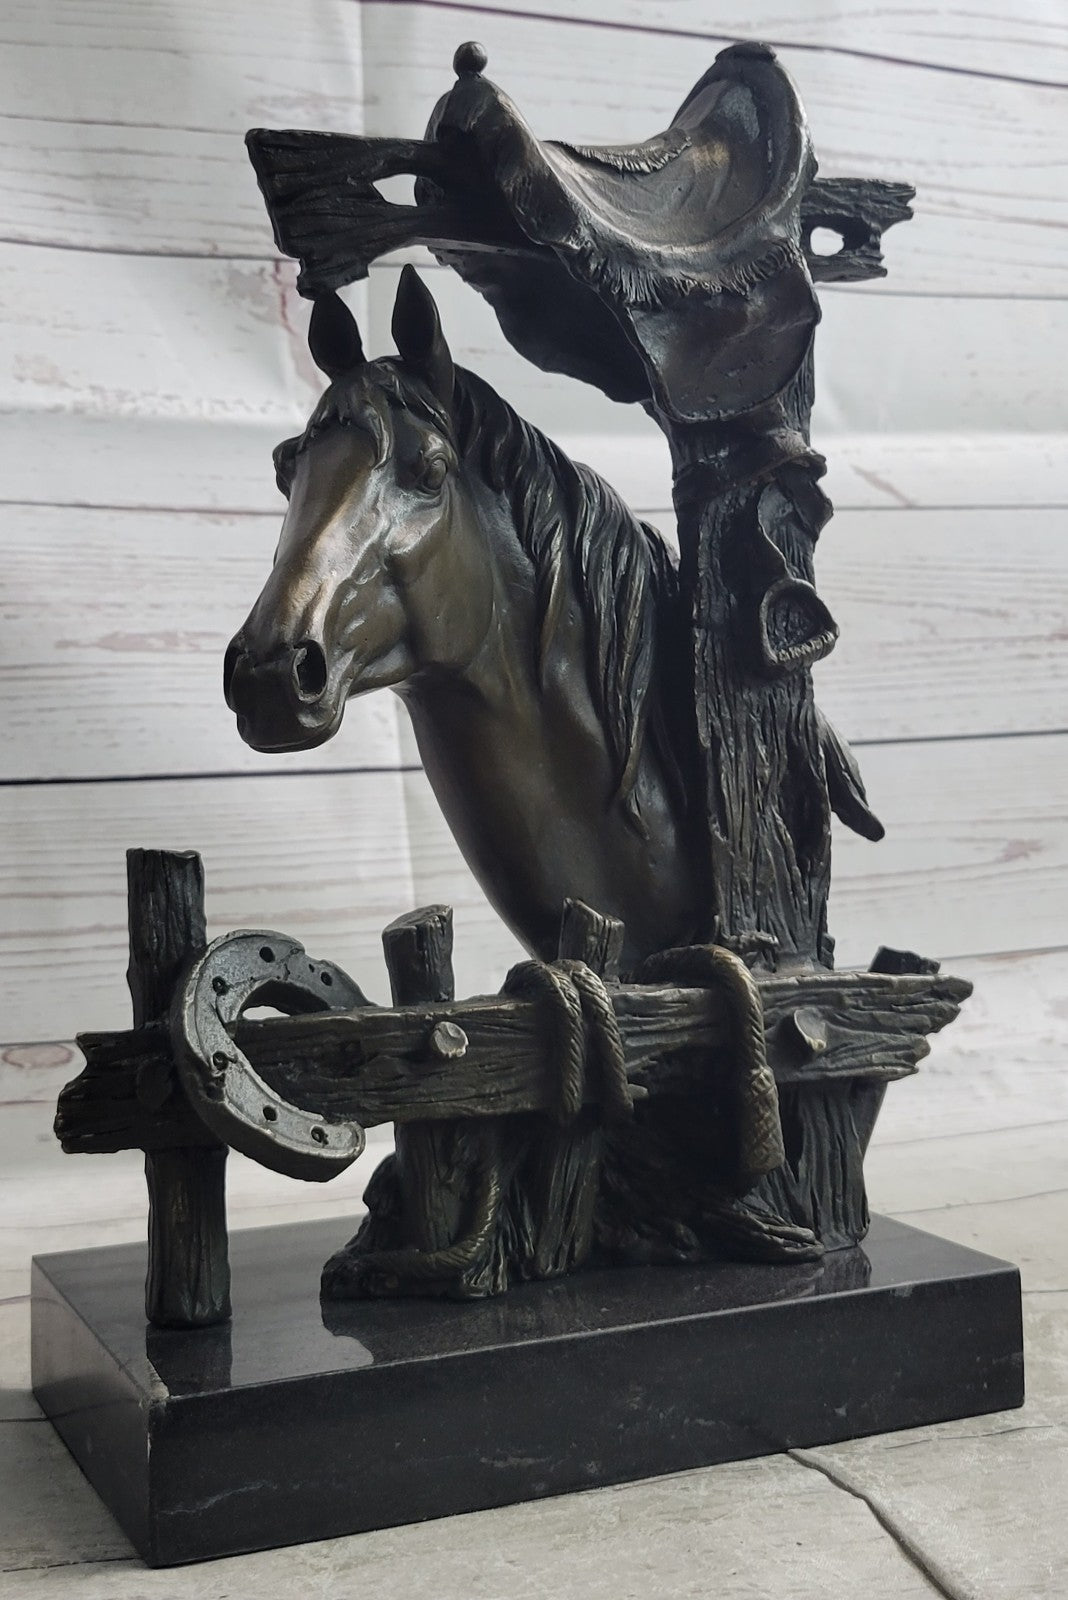 Bronze Statue of a Loving Horse with Saddle in Western Art Cowboy Style